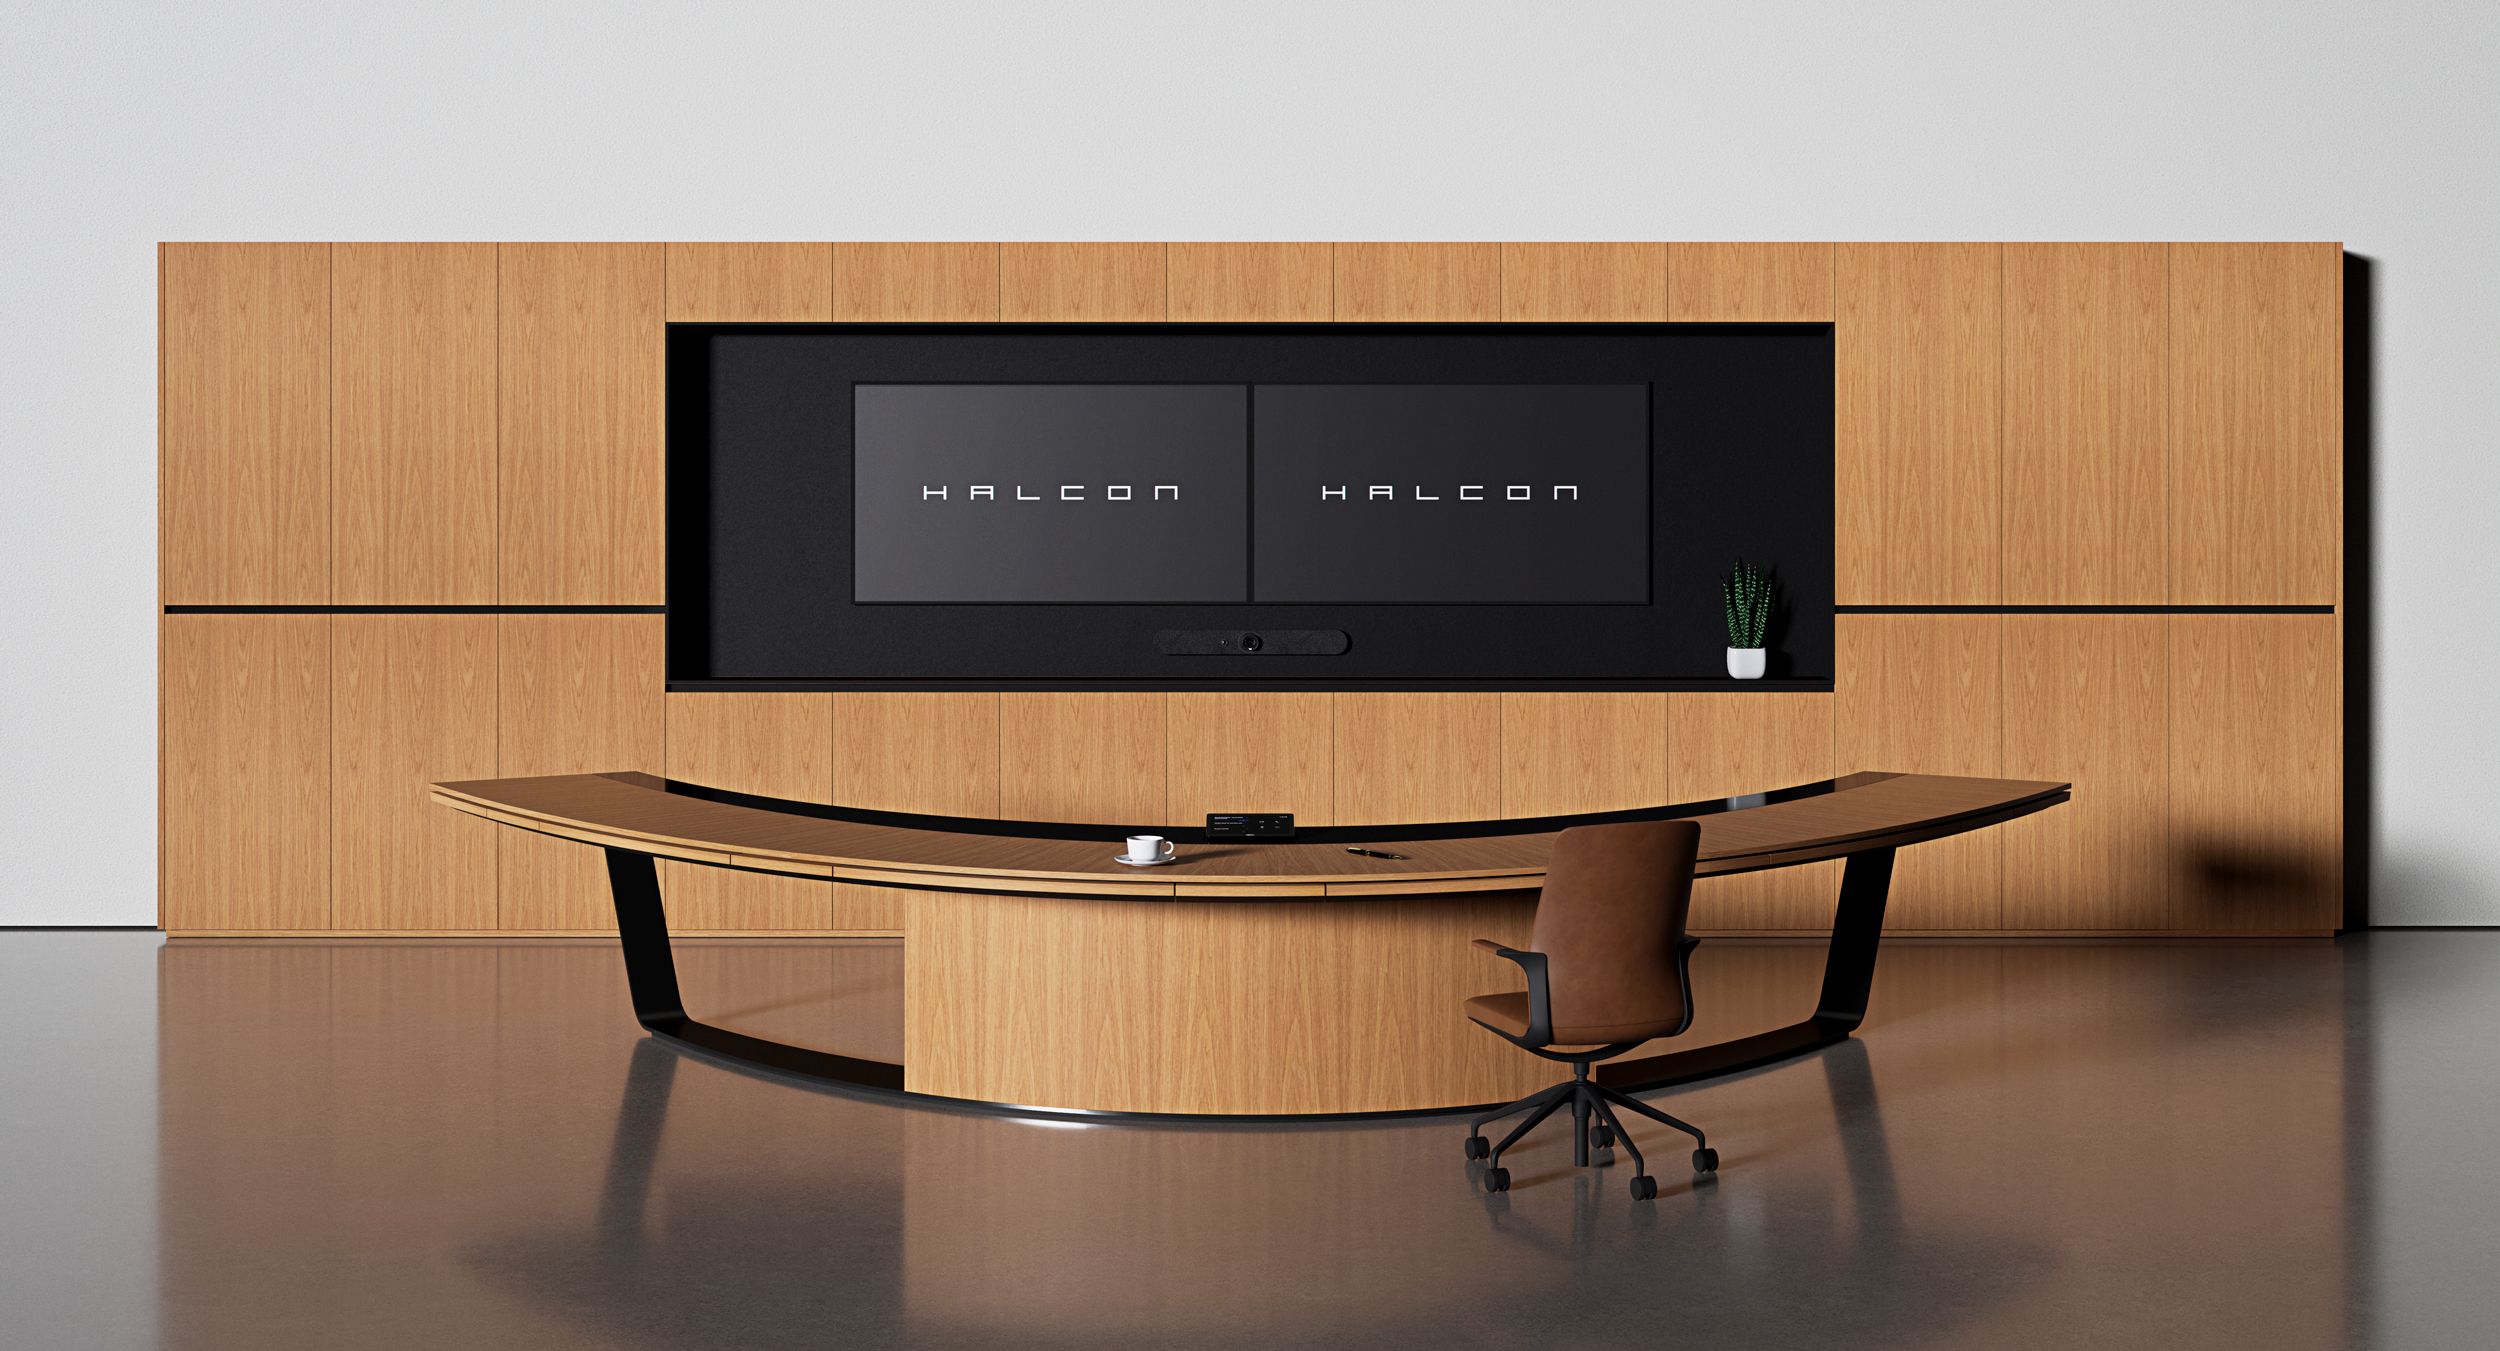 Experience more engaging collaboration when furniture and technology are thoughtfully brought together.